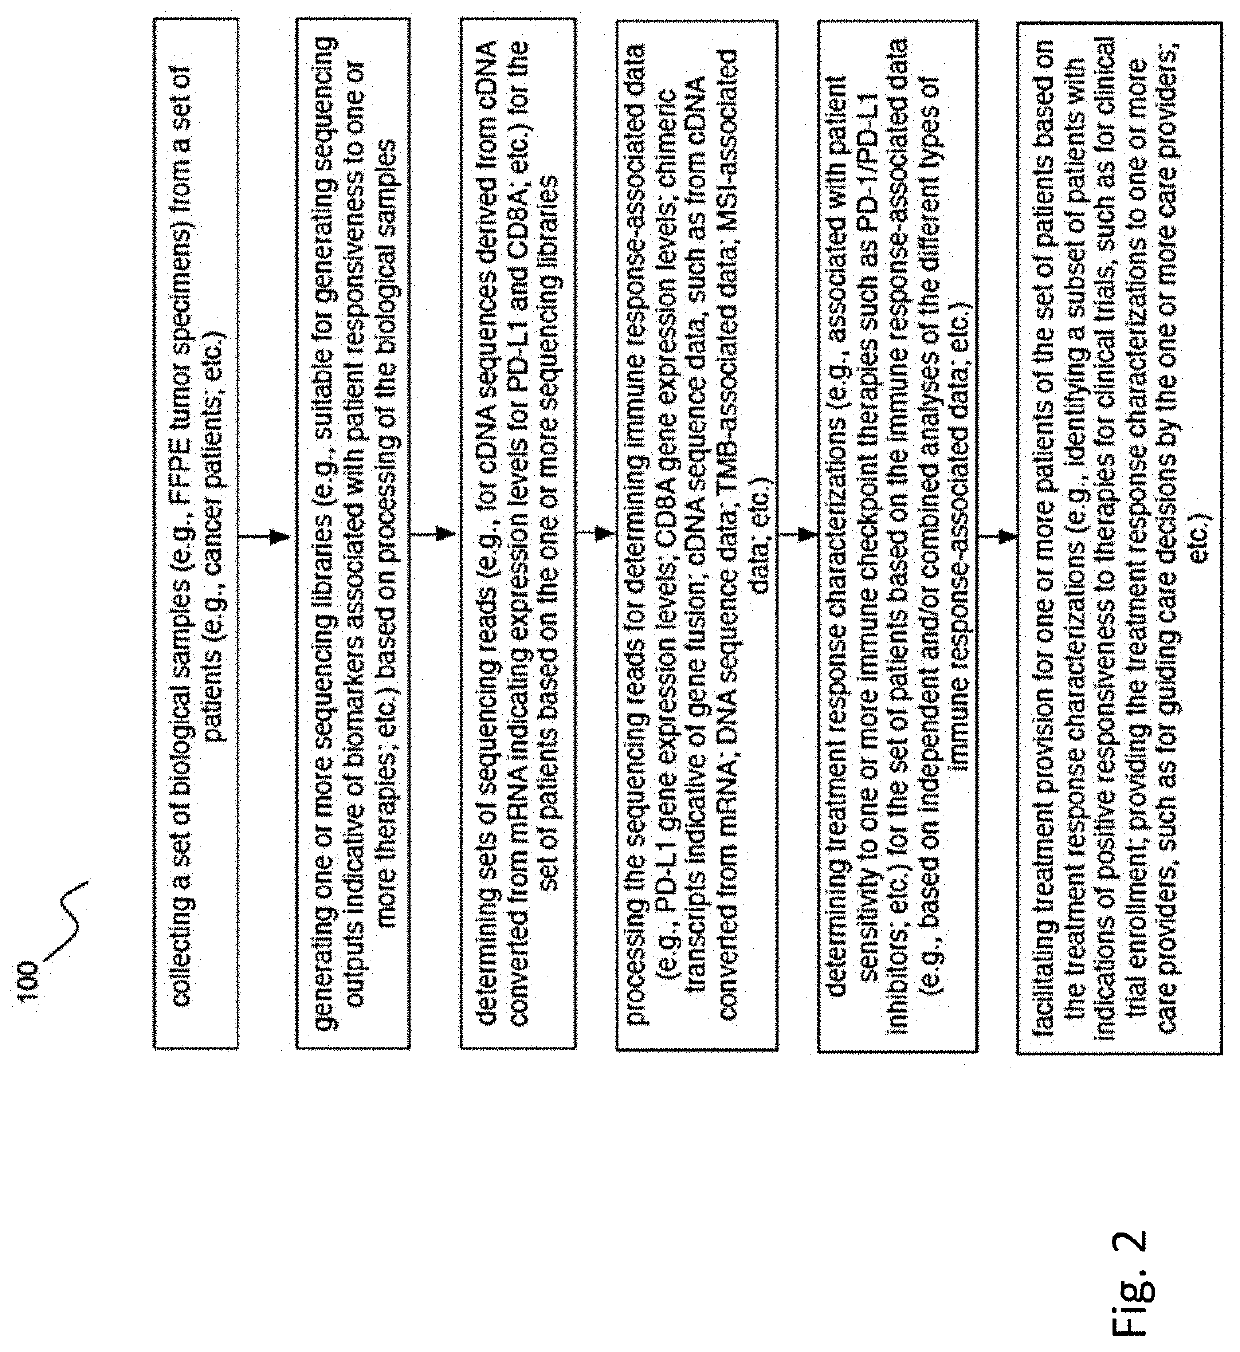 Methods of detecting and treating subjects with checkpoint inhibitor-responsive cancer